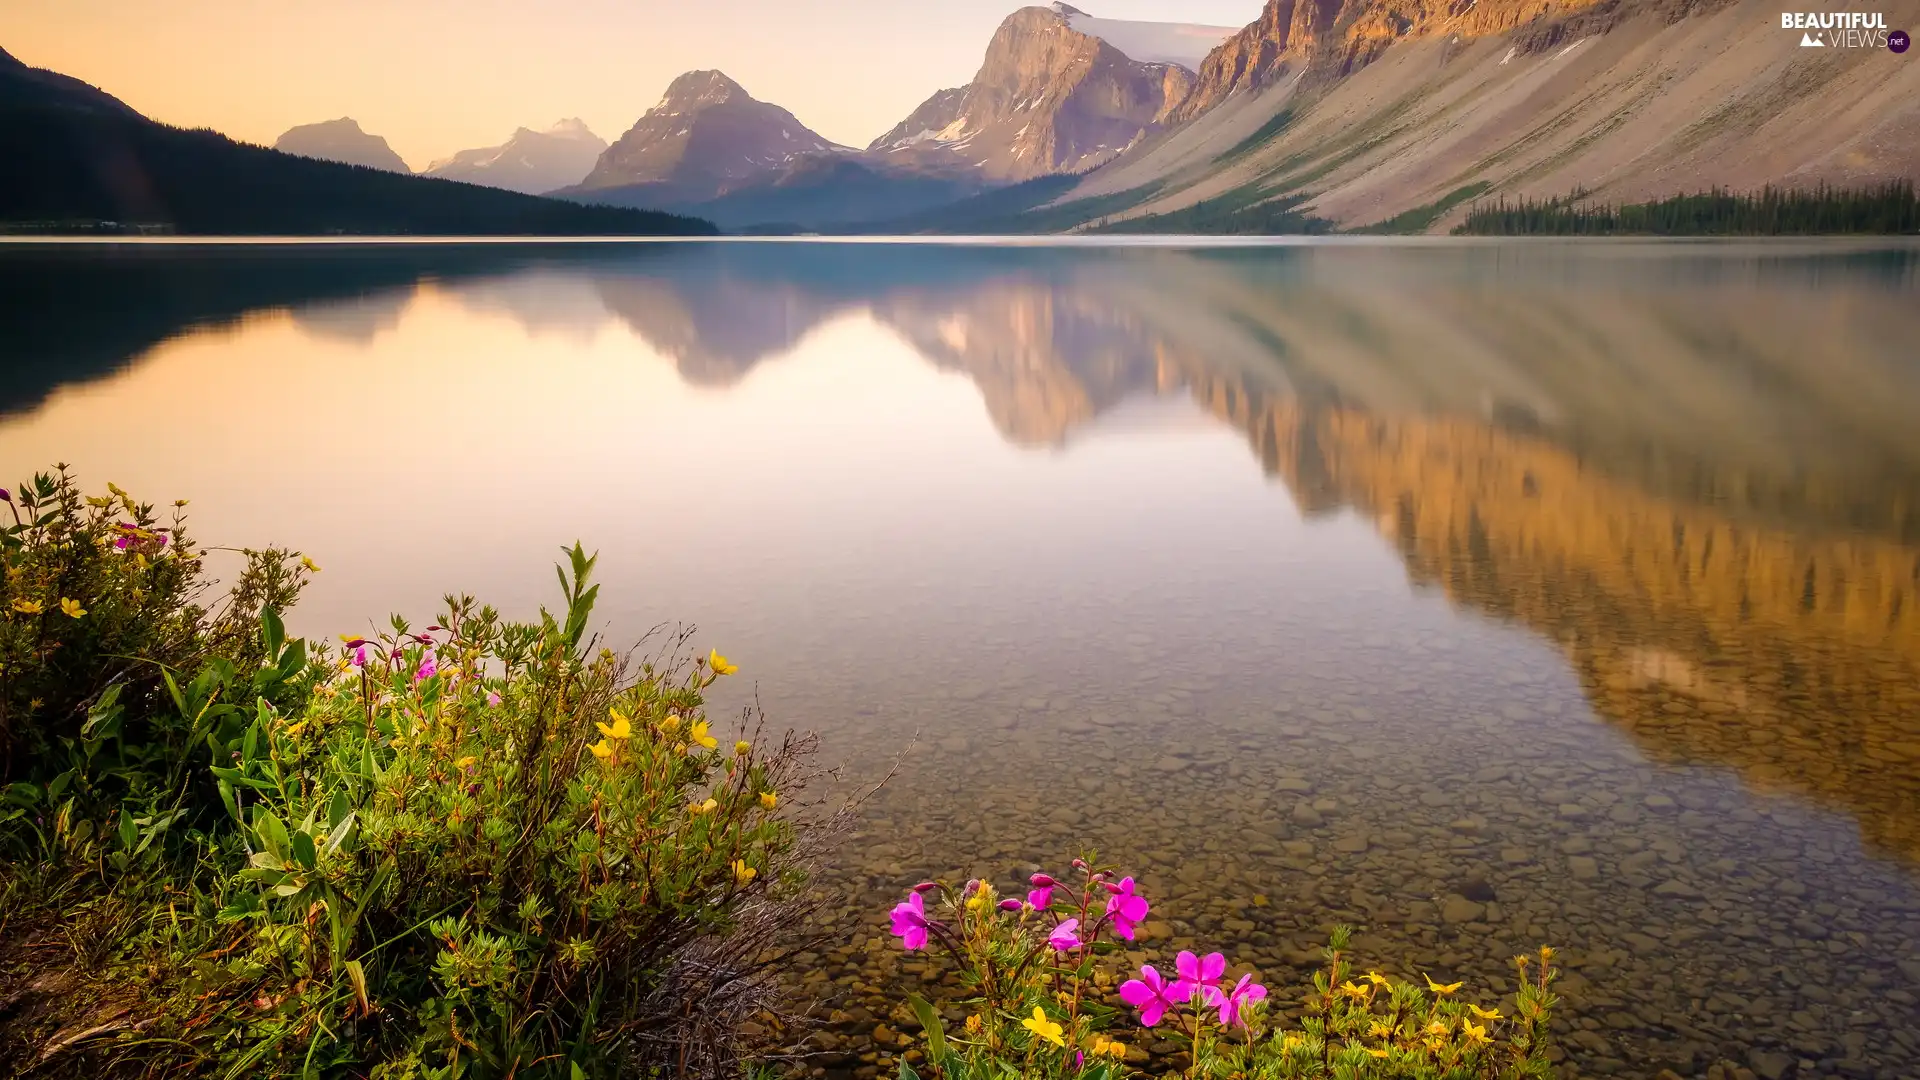 Flowers, Bow Lake, Province of Alberta, Canada, Banff National Park, rocky mountains